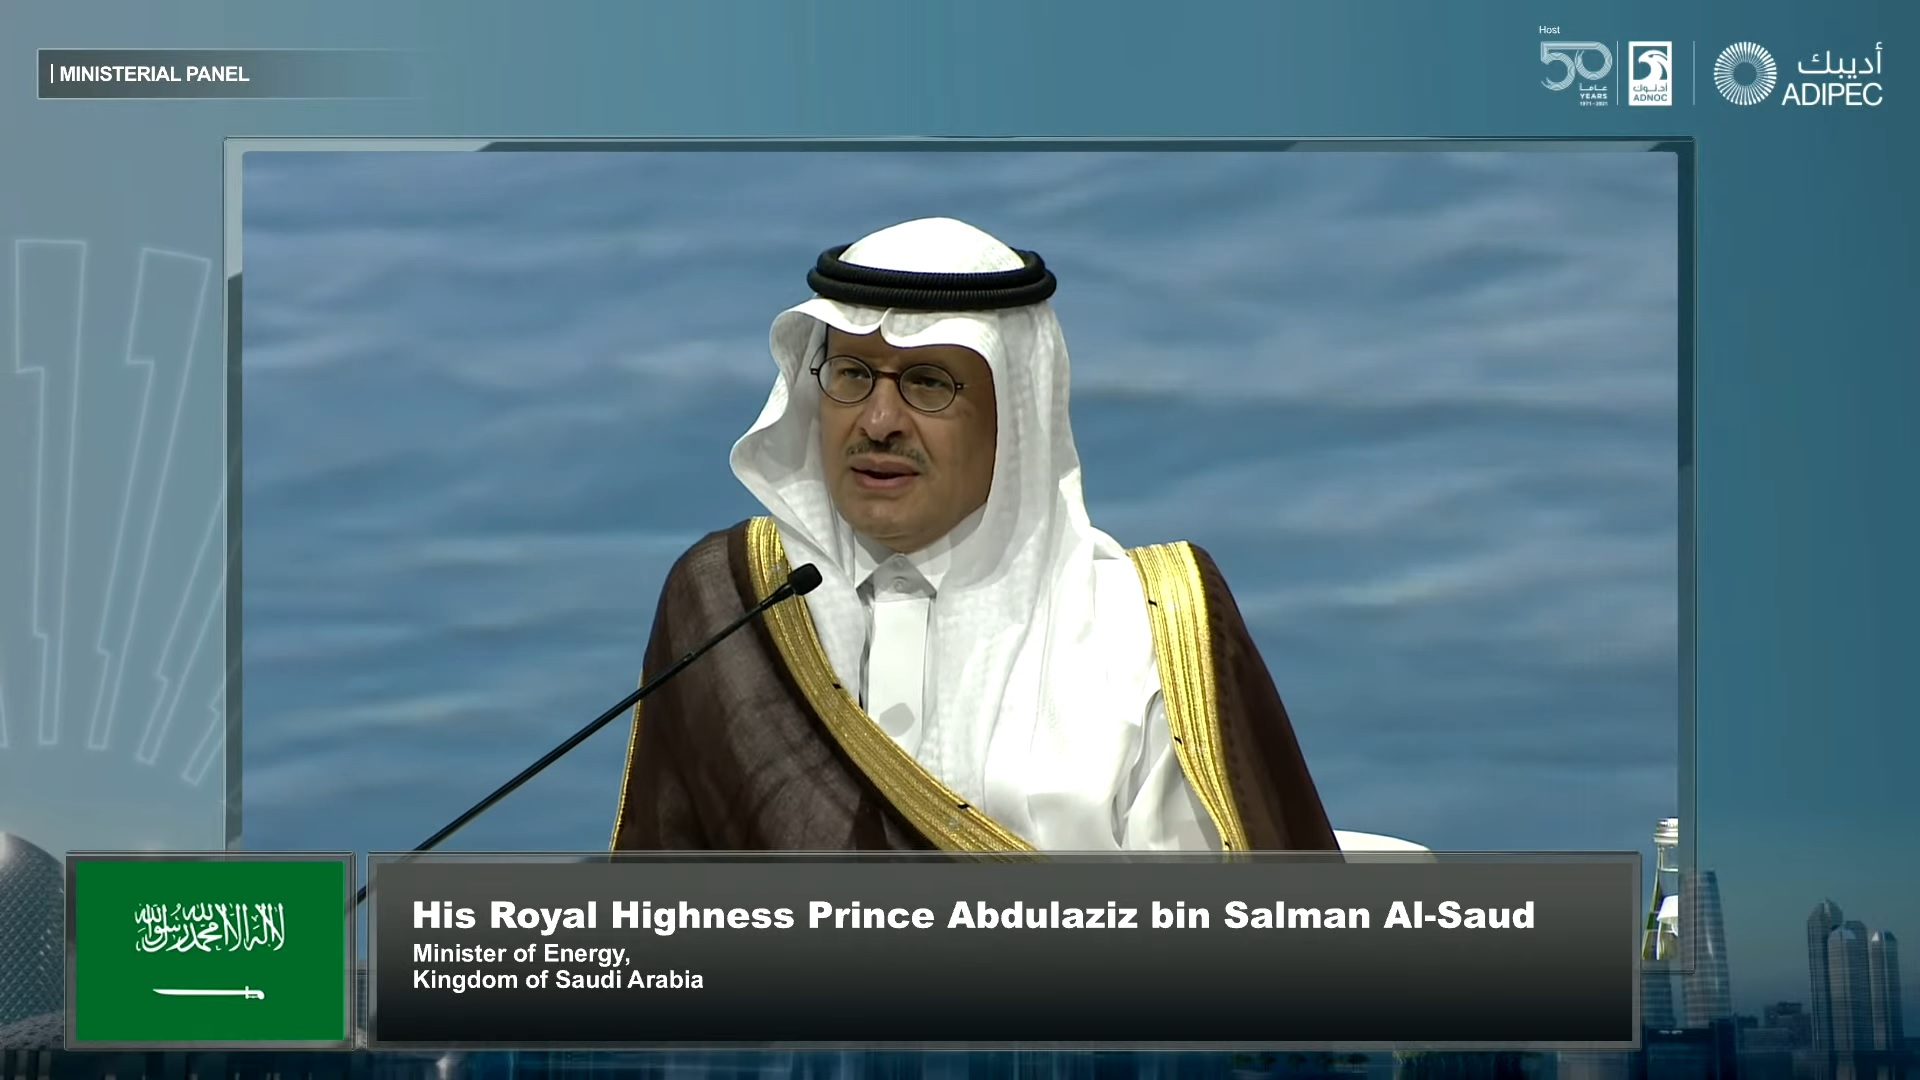 OPEC+ delivered more than any group “on planet earth”: Prince Abdulaziz